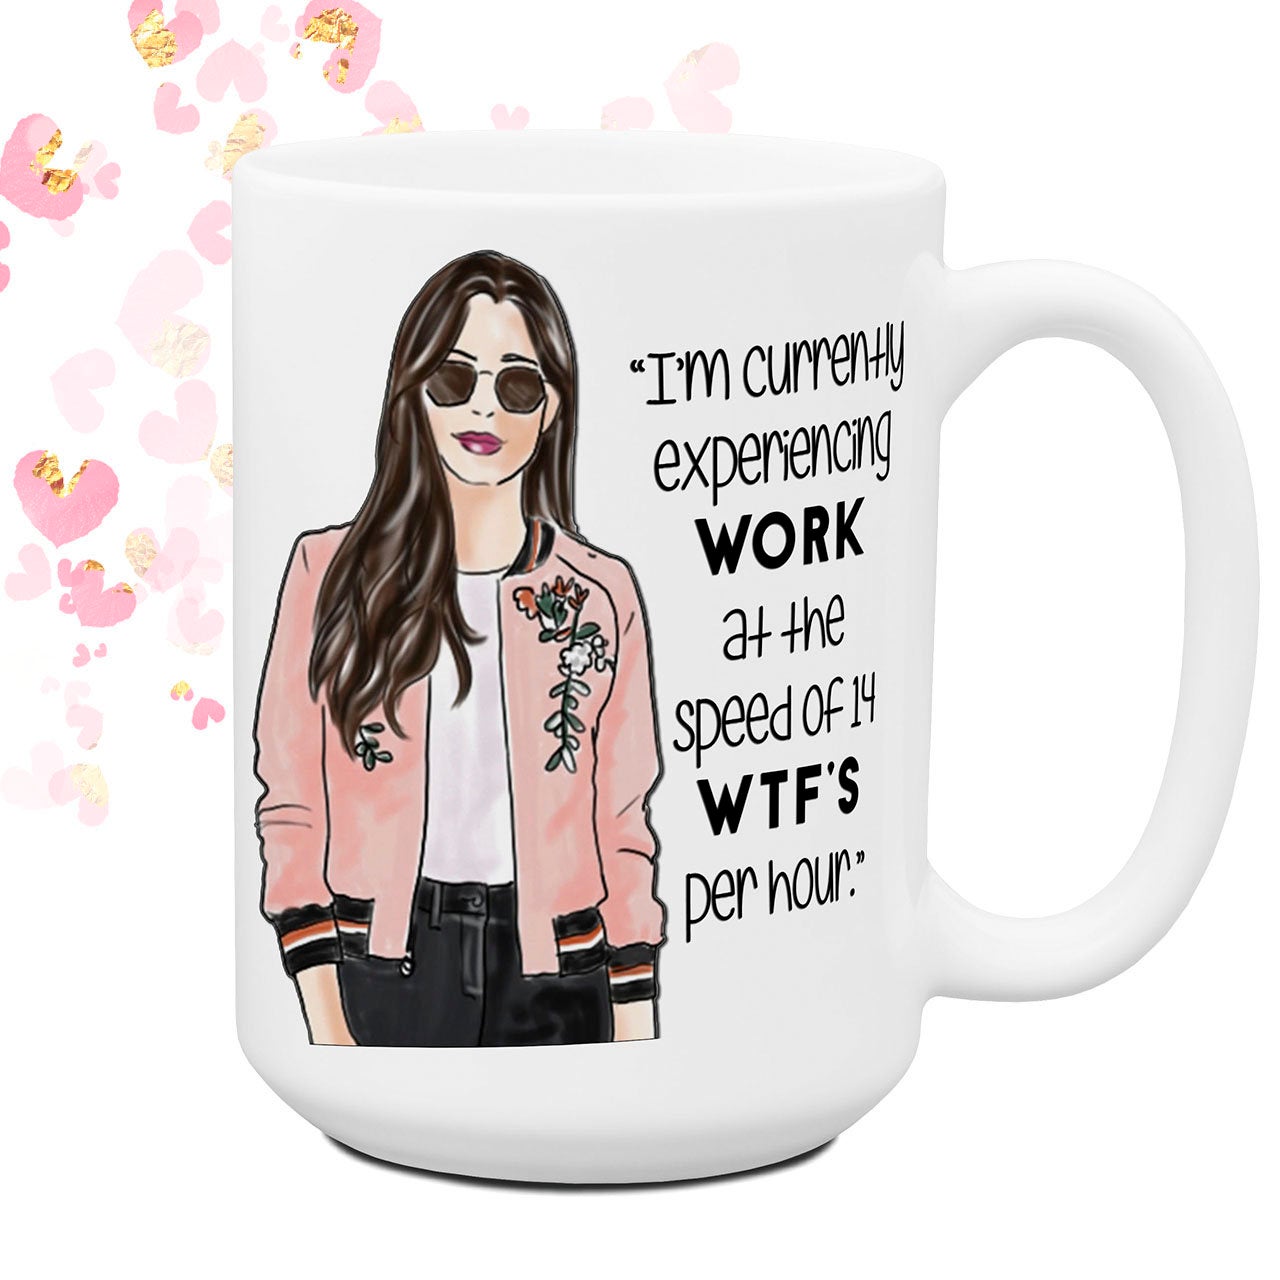 Experiencing Work at 14 WTF's per hour Coffee Mug Office Theme Cup Fun –  Julies Heart